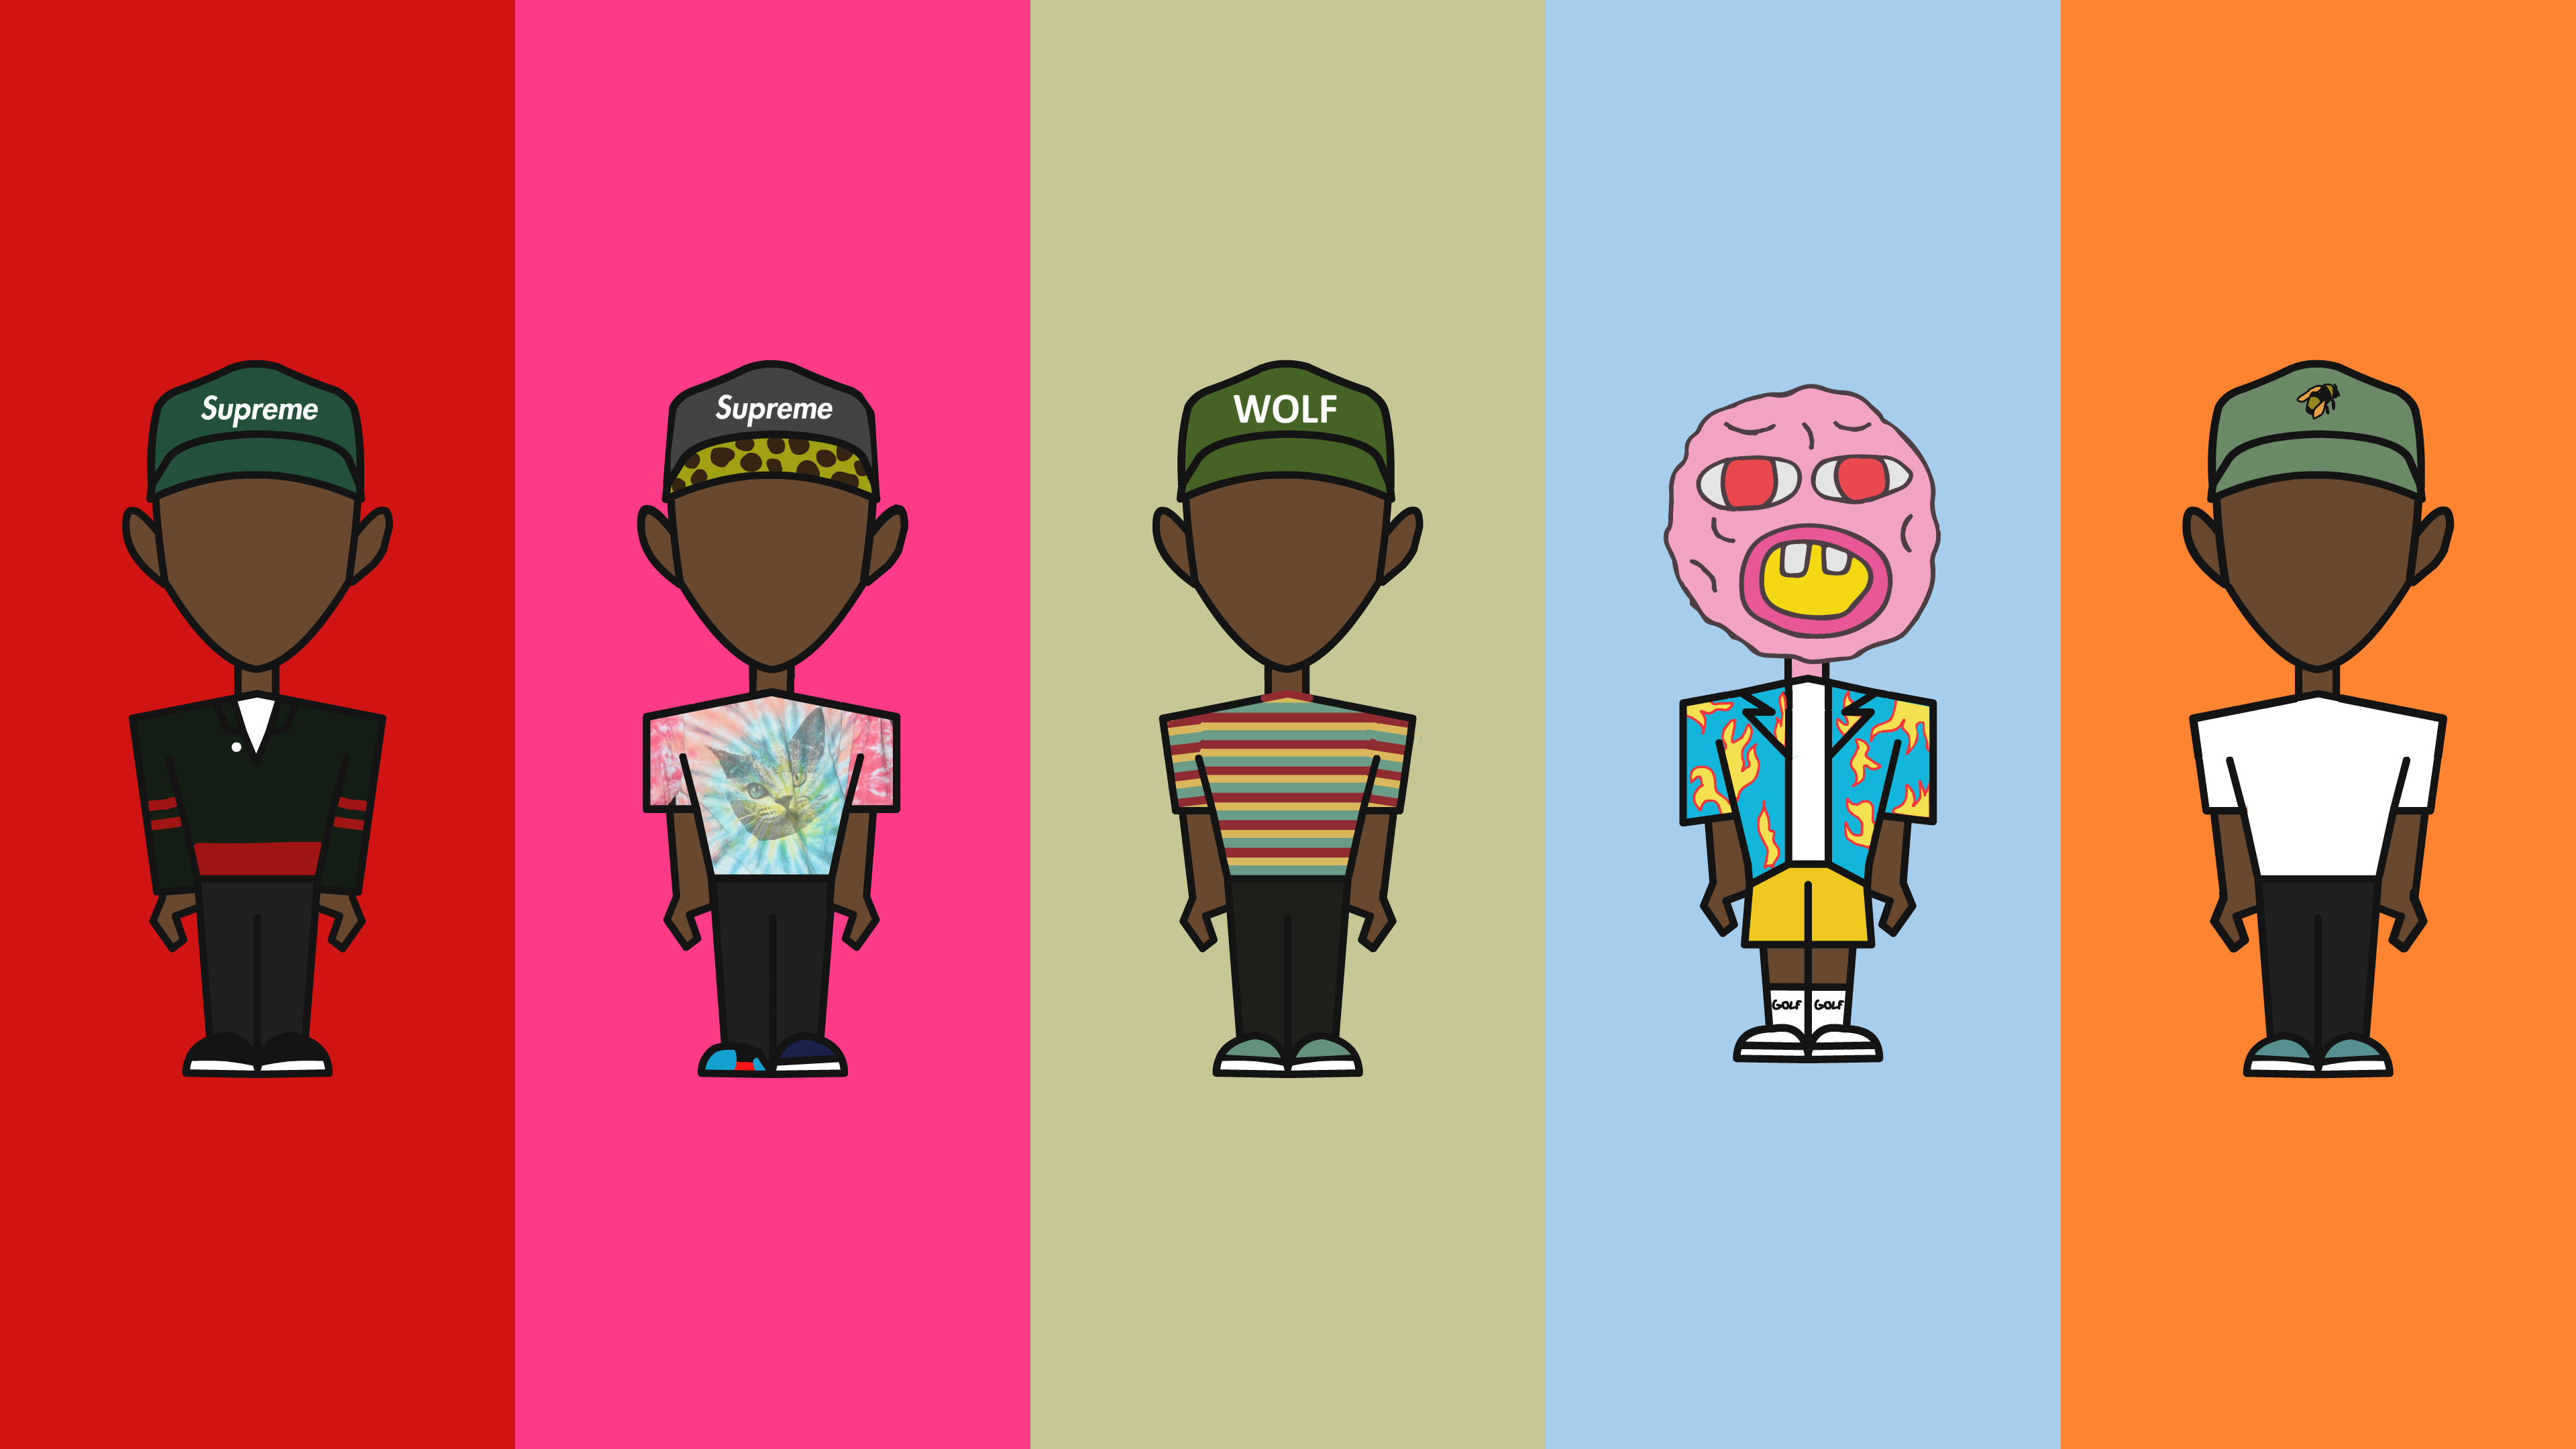 I've recreated the iconic Kanye wallpaper with Tyler